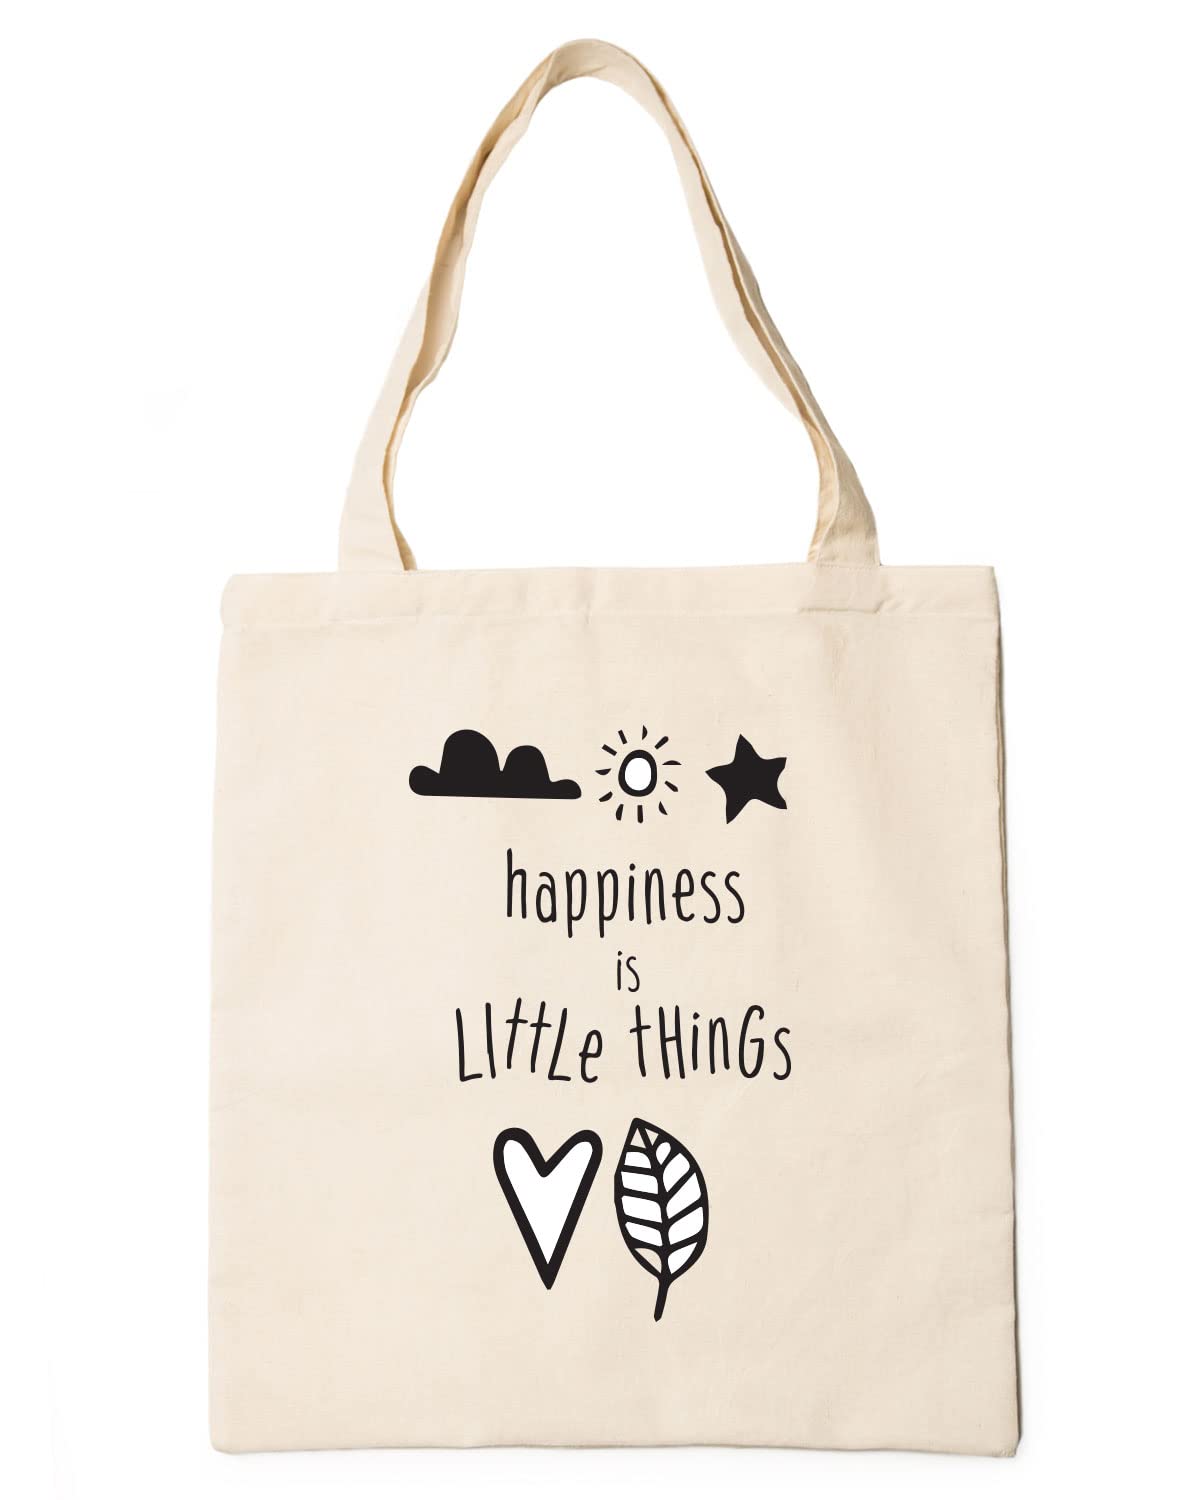 The Pink Magnet Happiness Is Little Things Tote Bag - Canvas Tote Bag for Women | Printed Multipurpose Cotton Bags | Cute Hand Bag for Girls | Best for College, Travel, Grocery | Reusable Shopping Bag